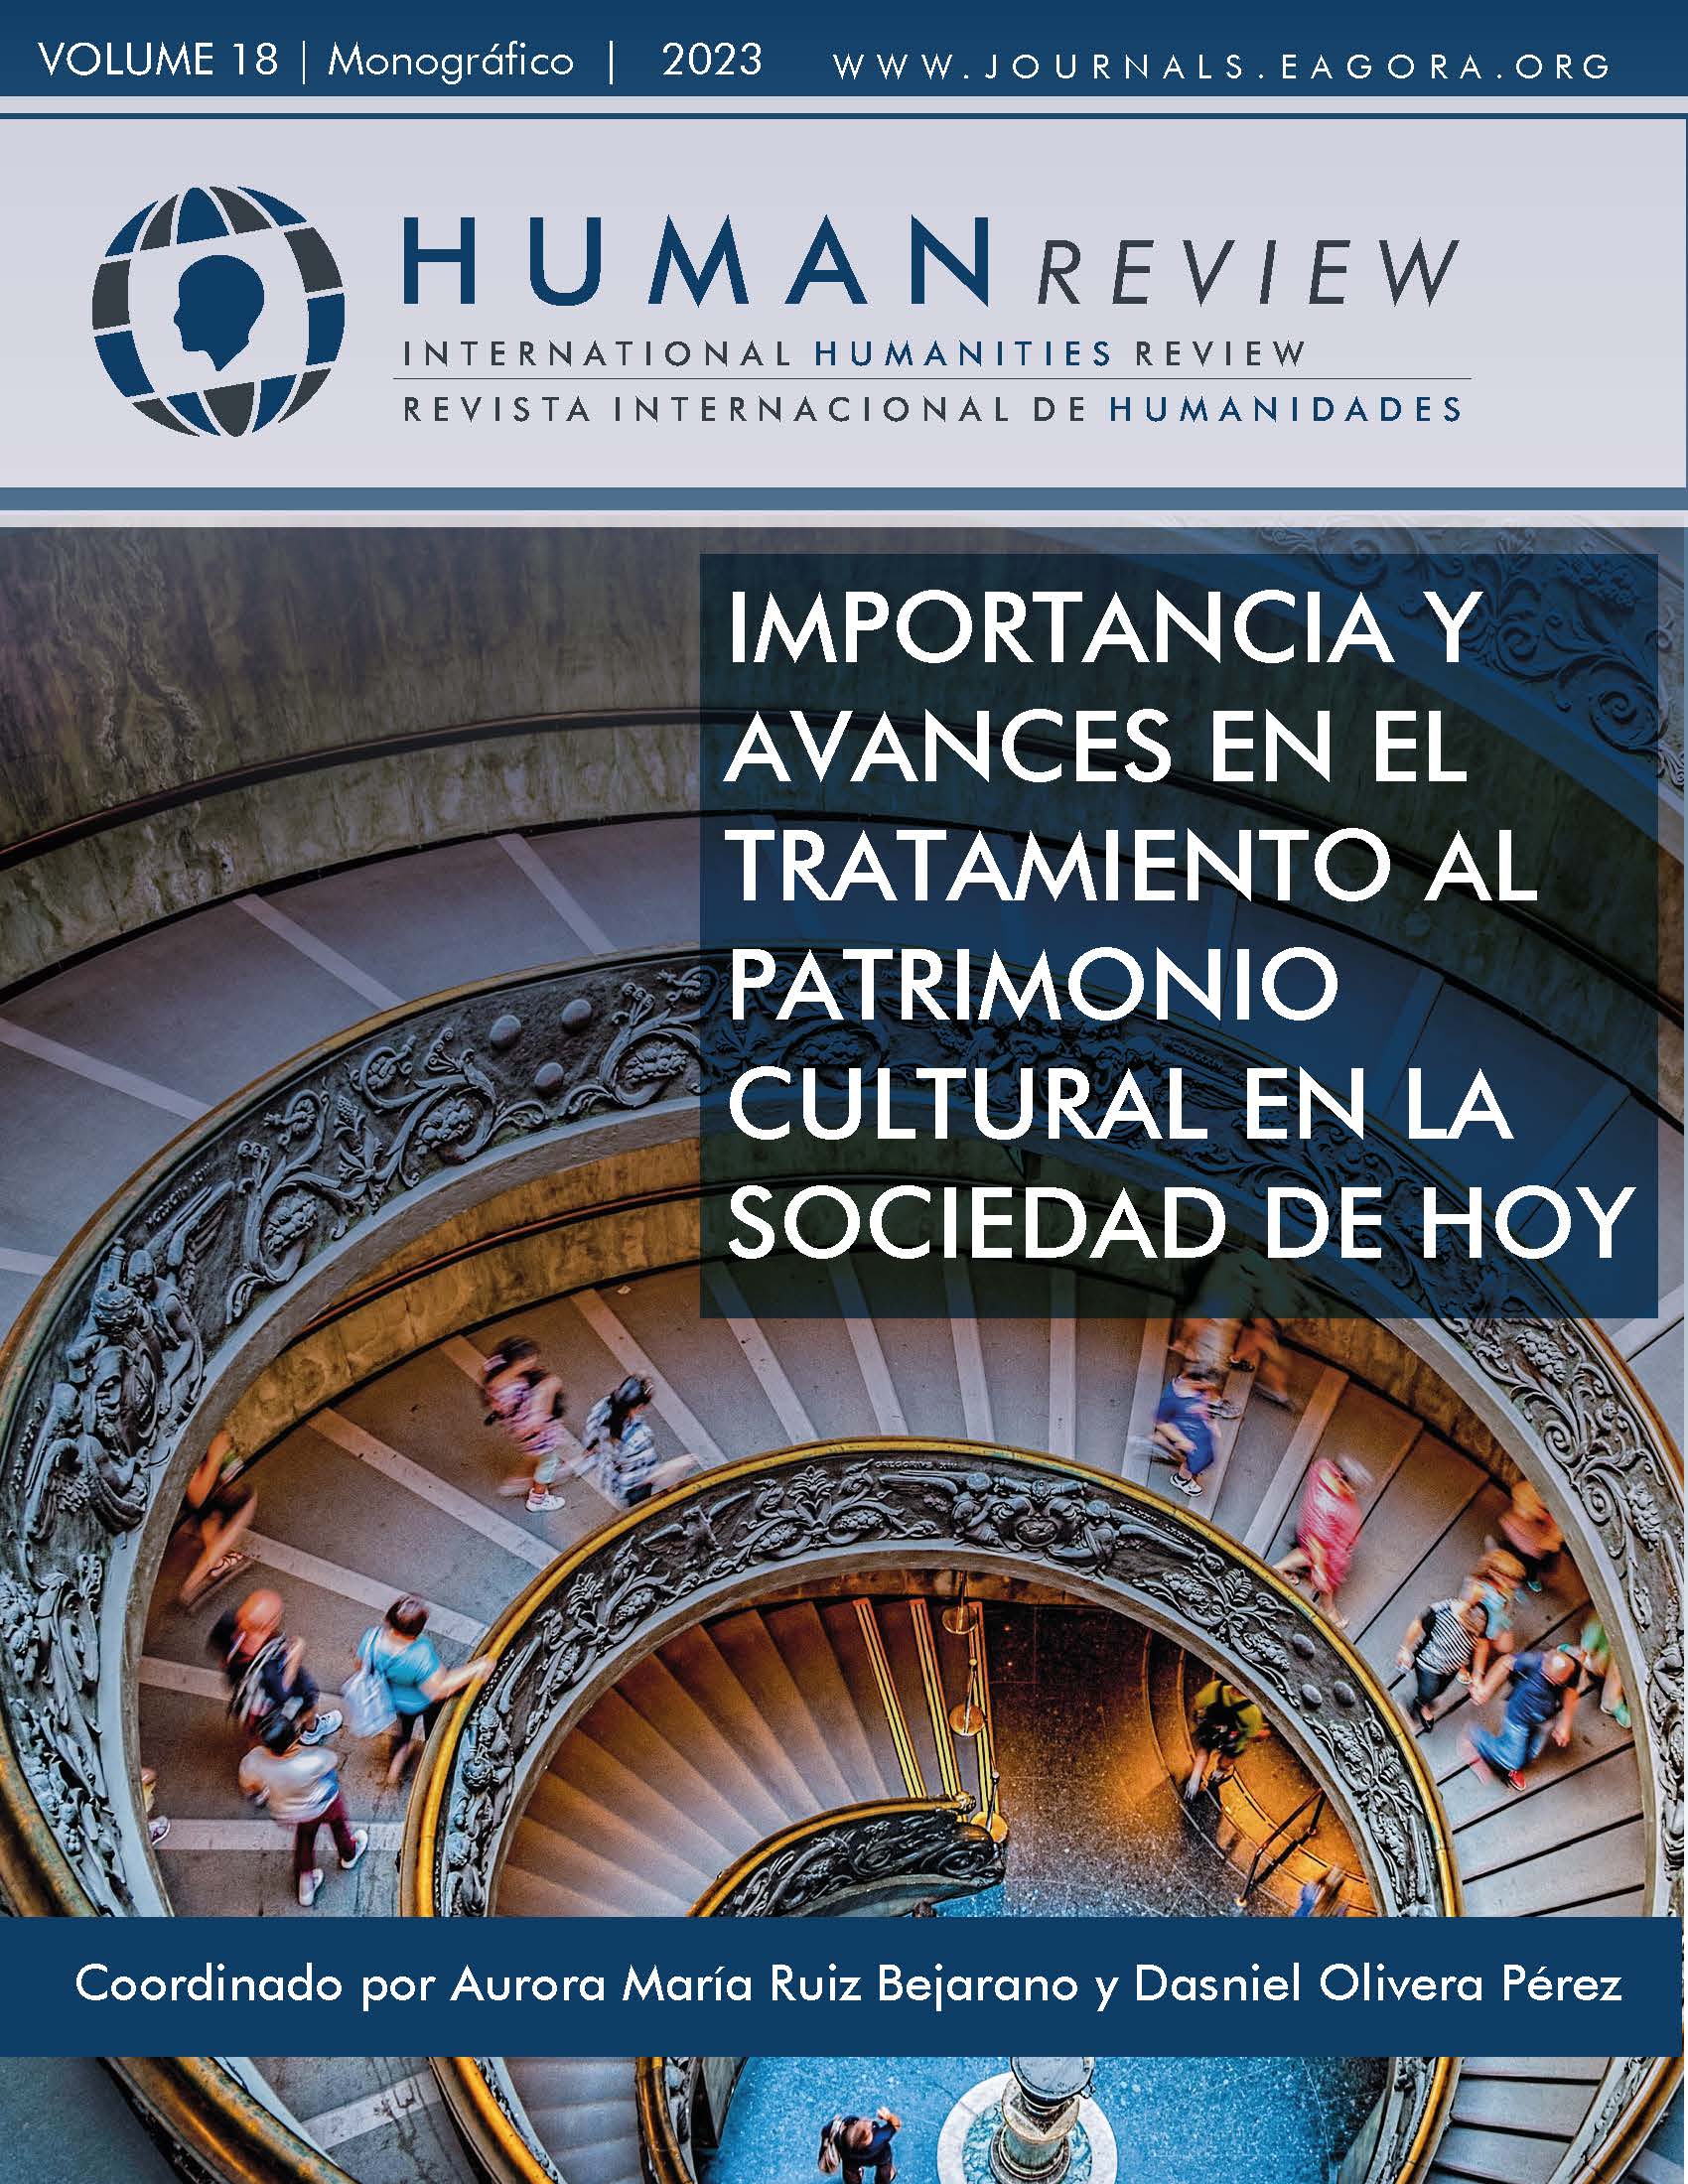 					View Vol. 18 No. 2 (2023): Monograph: "Importance and progress in the treatment of cultural heritage in today's society"
				